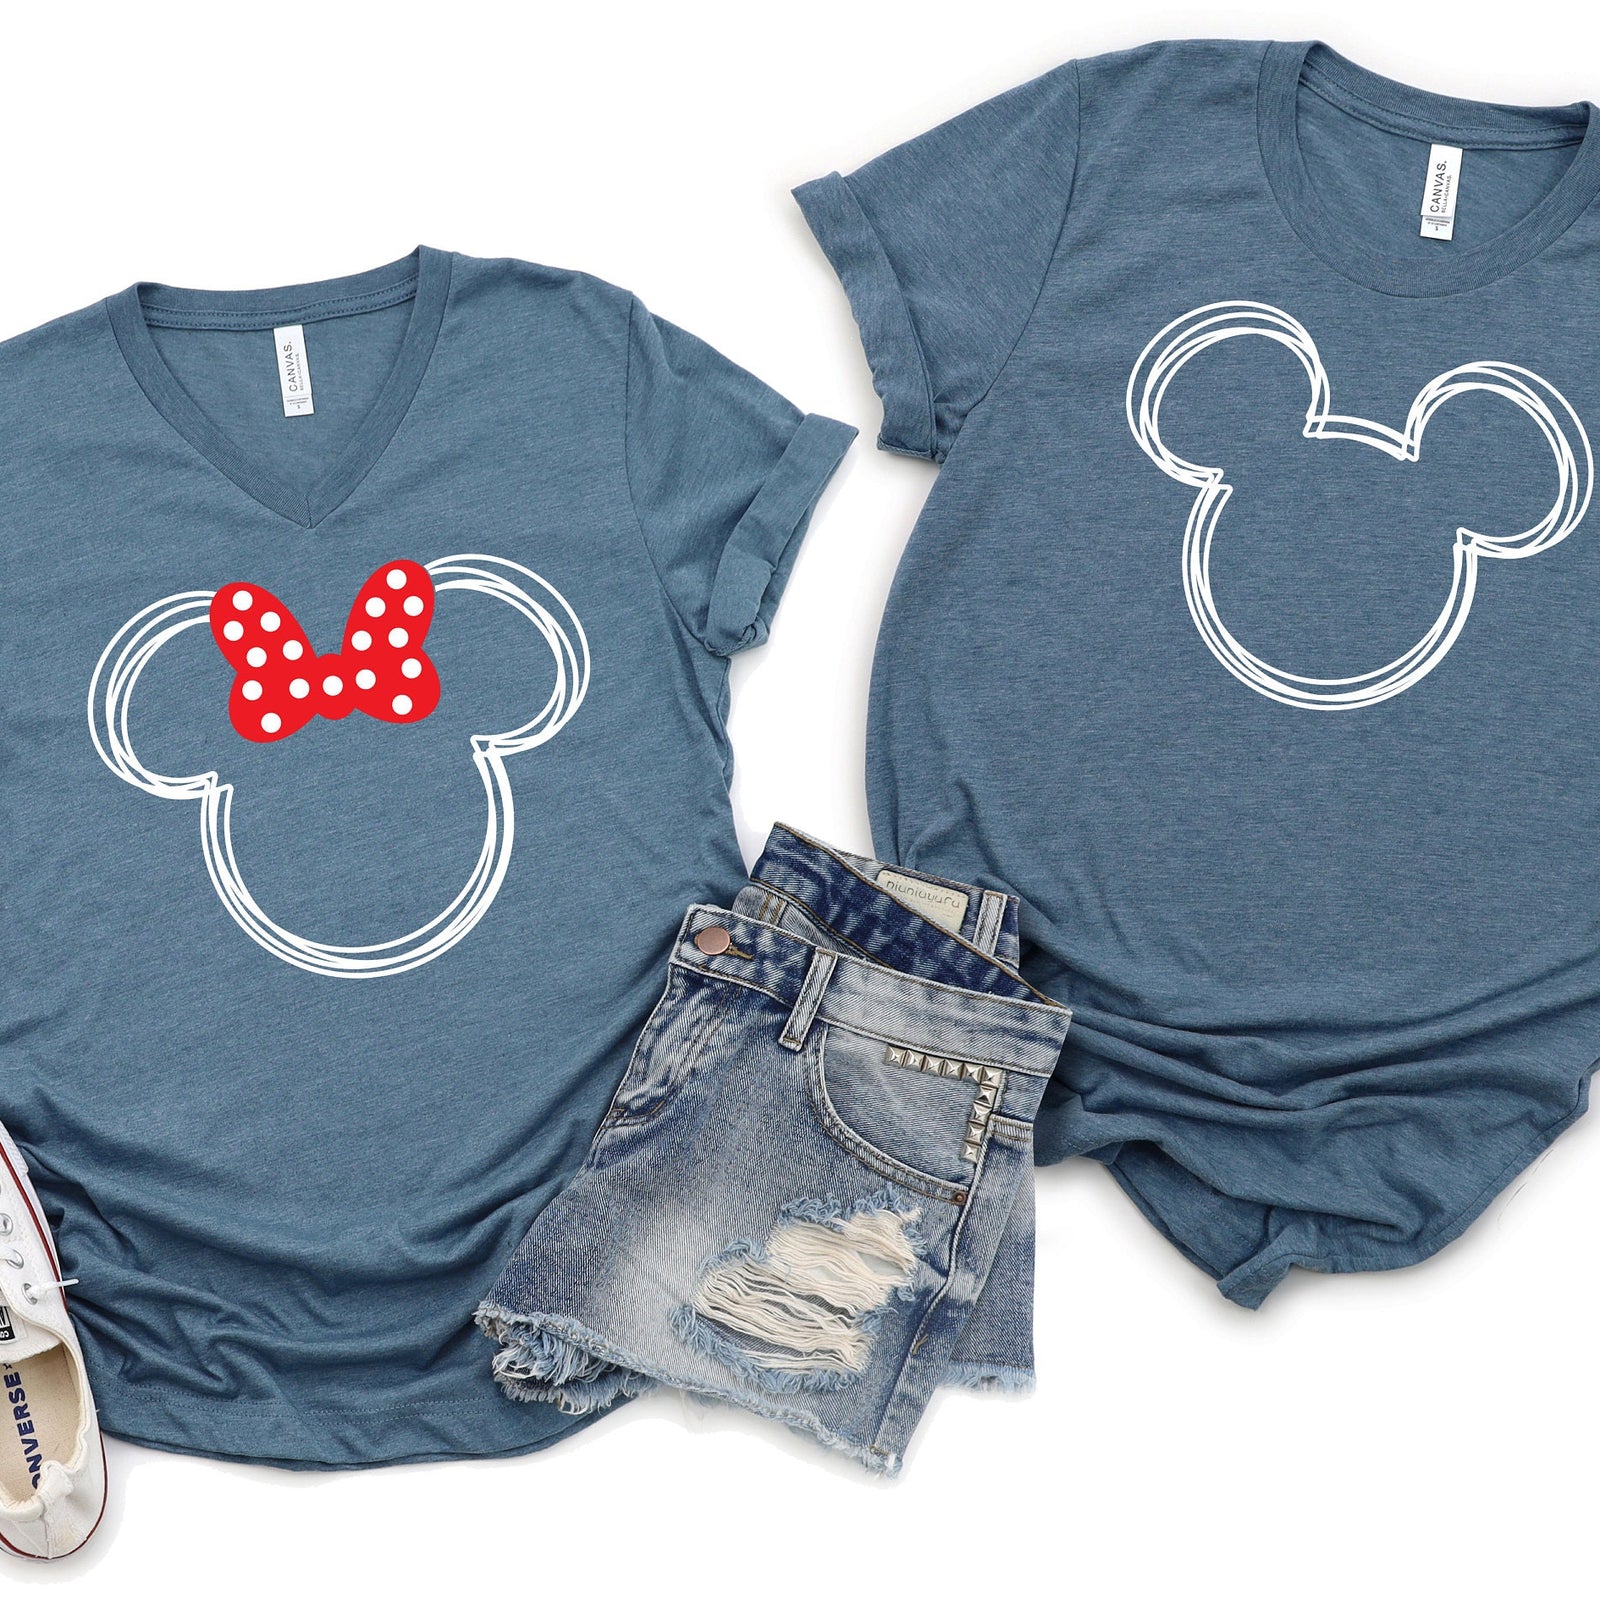 Scribble Minnie and Mickey Shirts - Disney Couples - Matching Shirts - Hand Drawn Characters